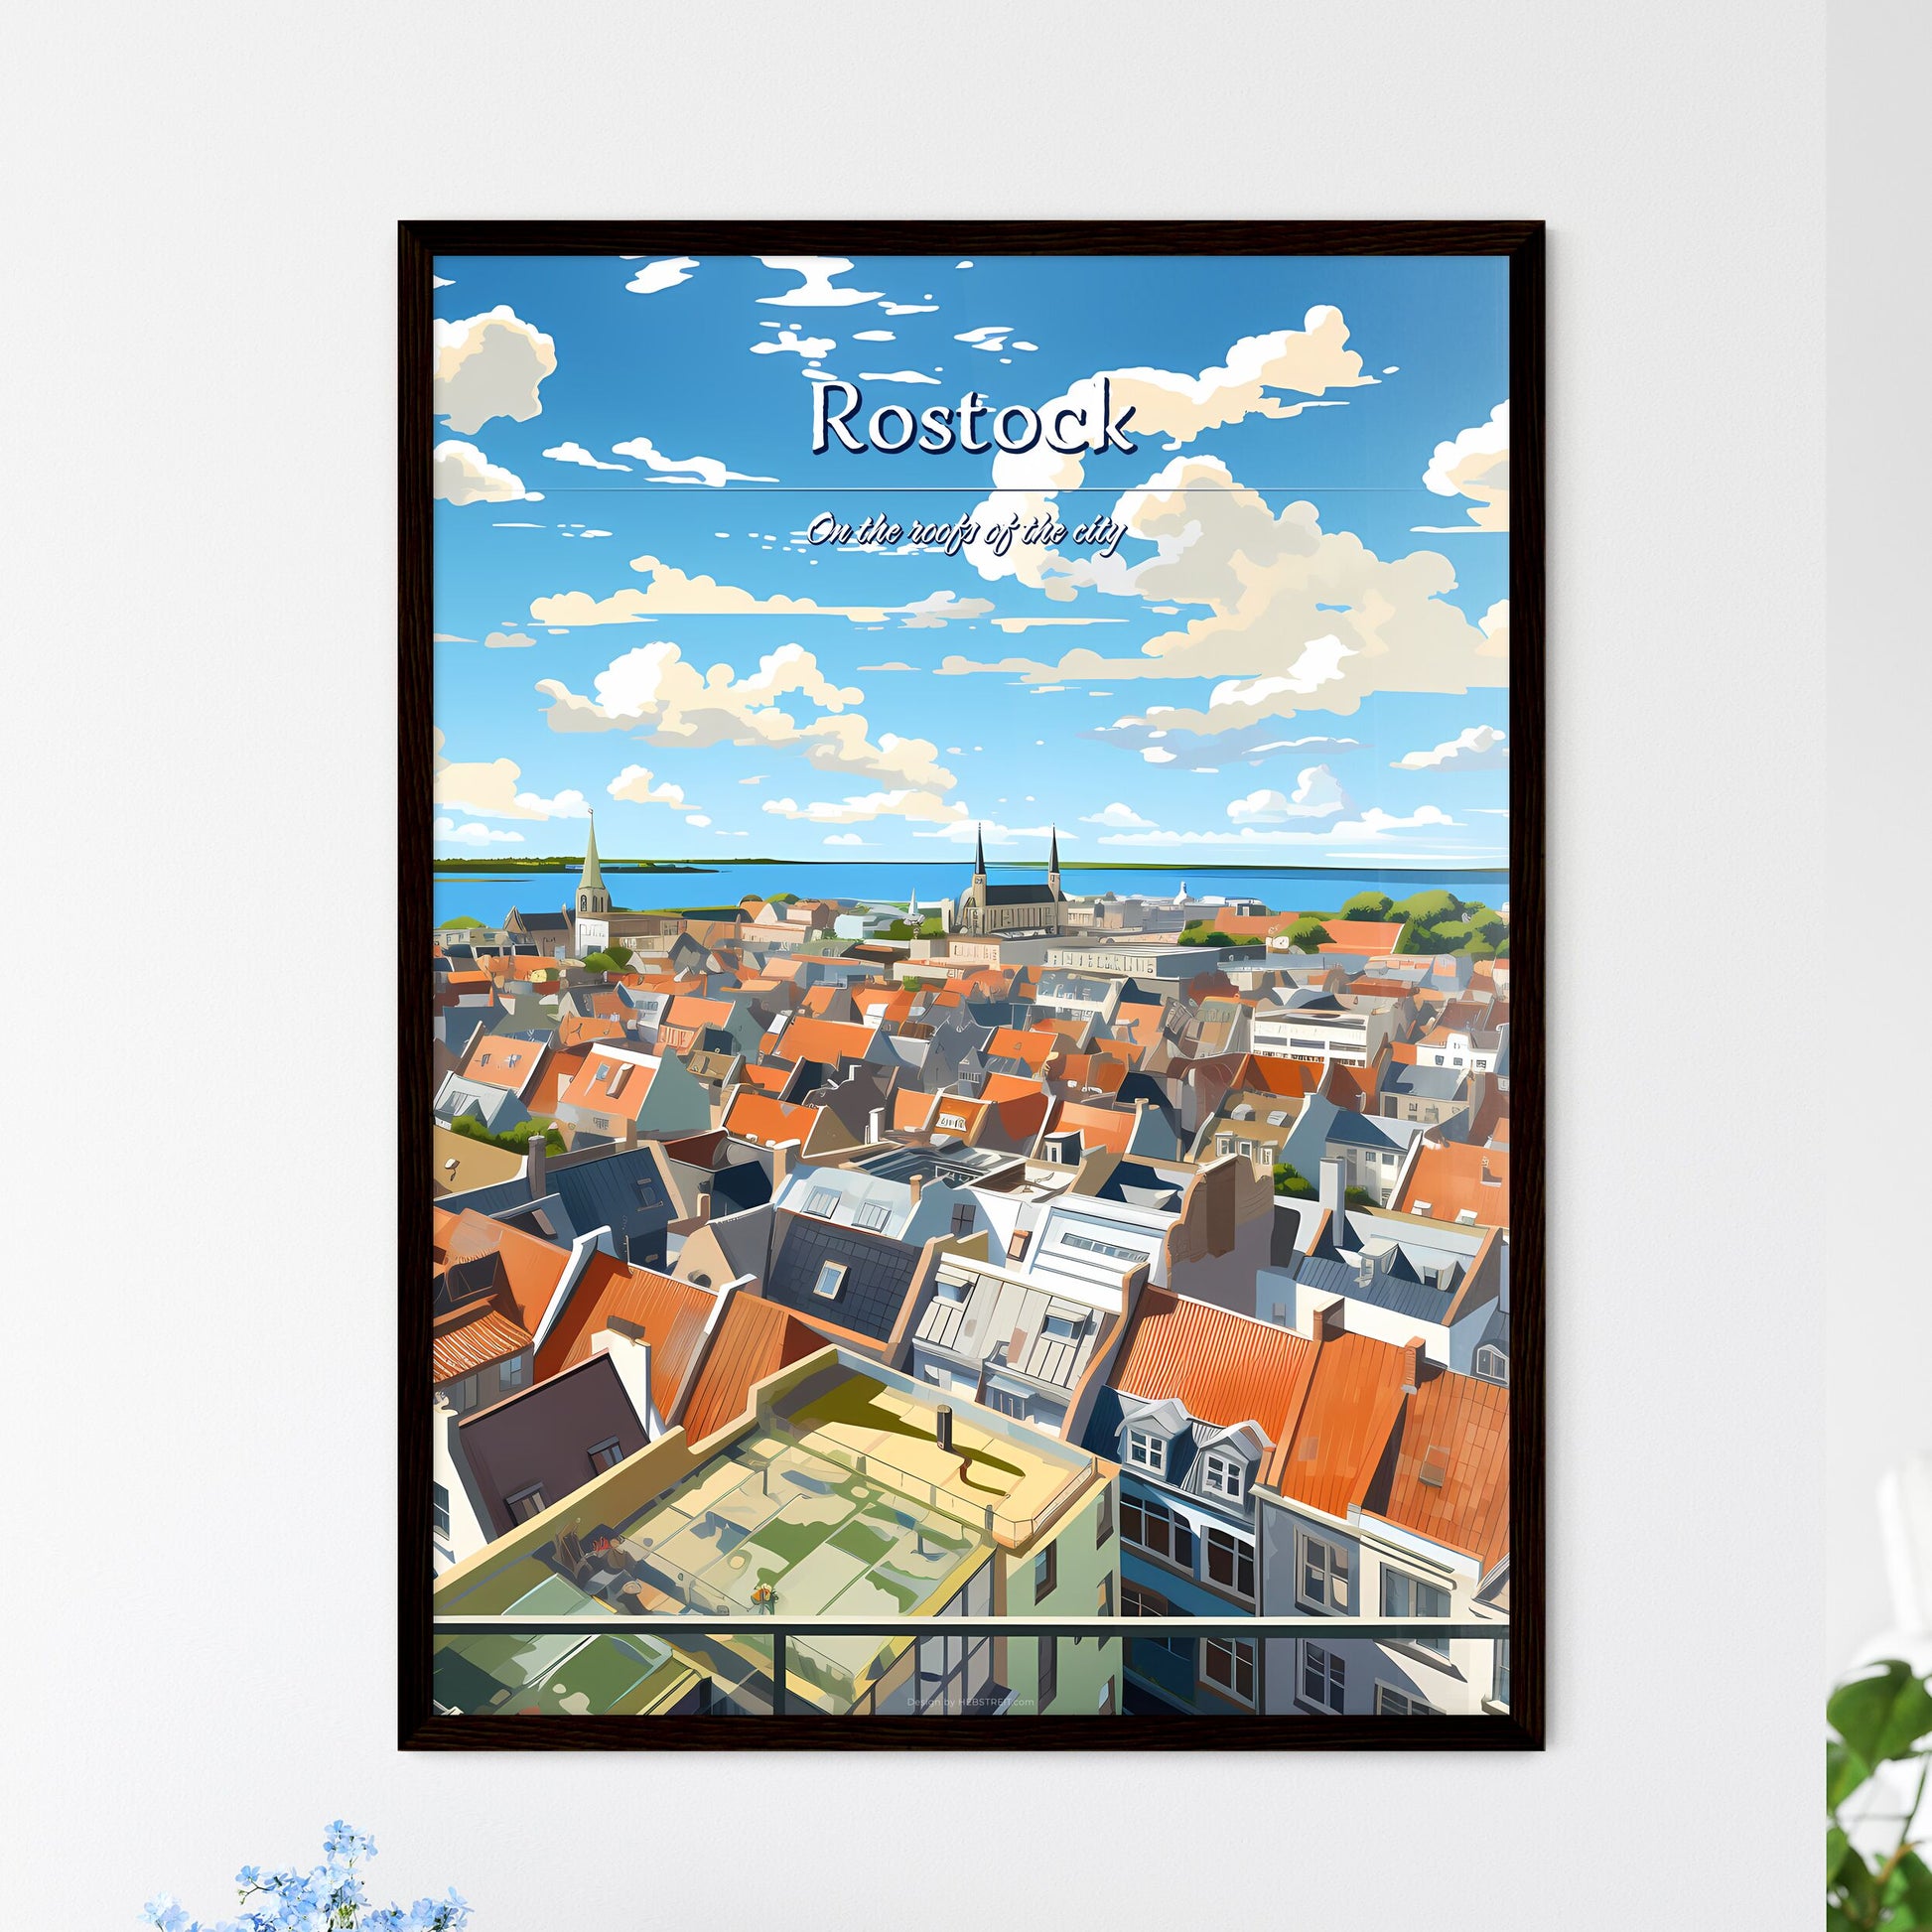 On the roofs of Rostock - Art print of a city with many roofs and a body of water Default Title